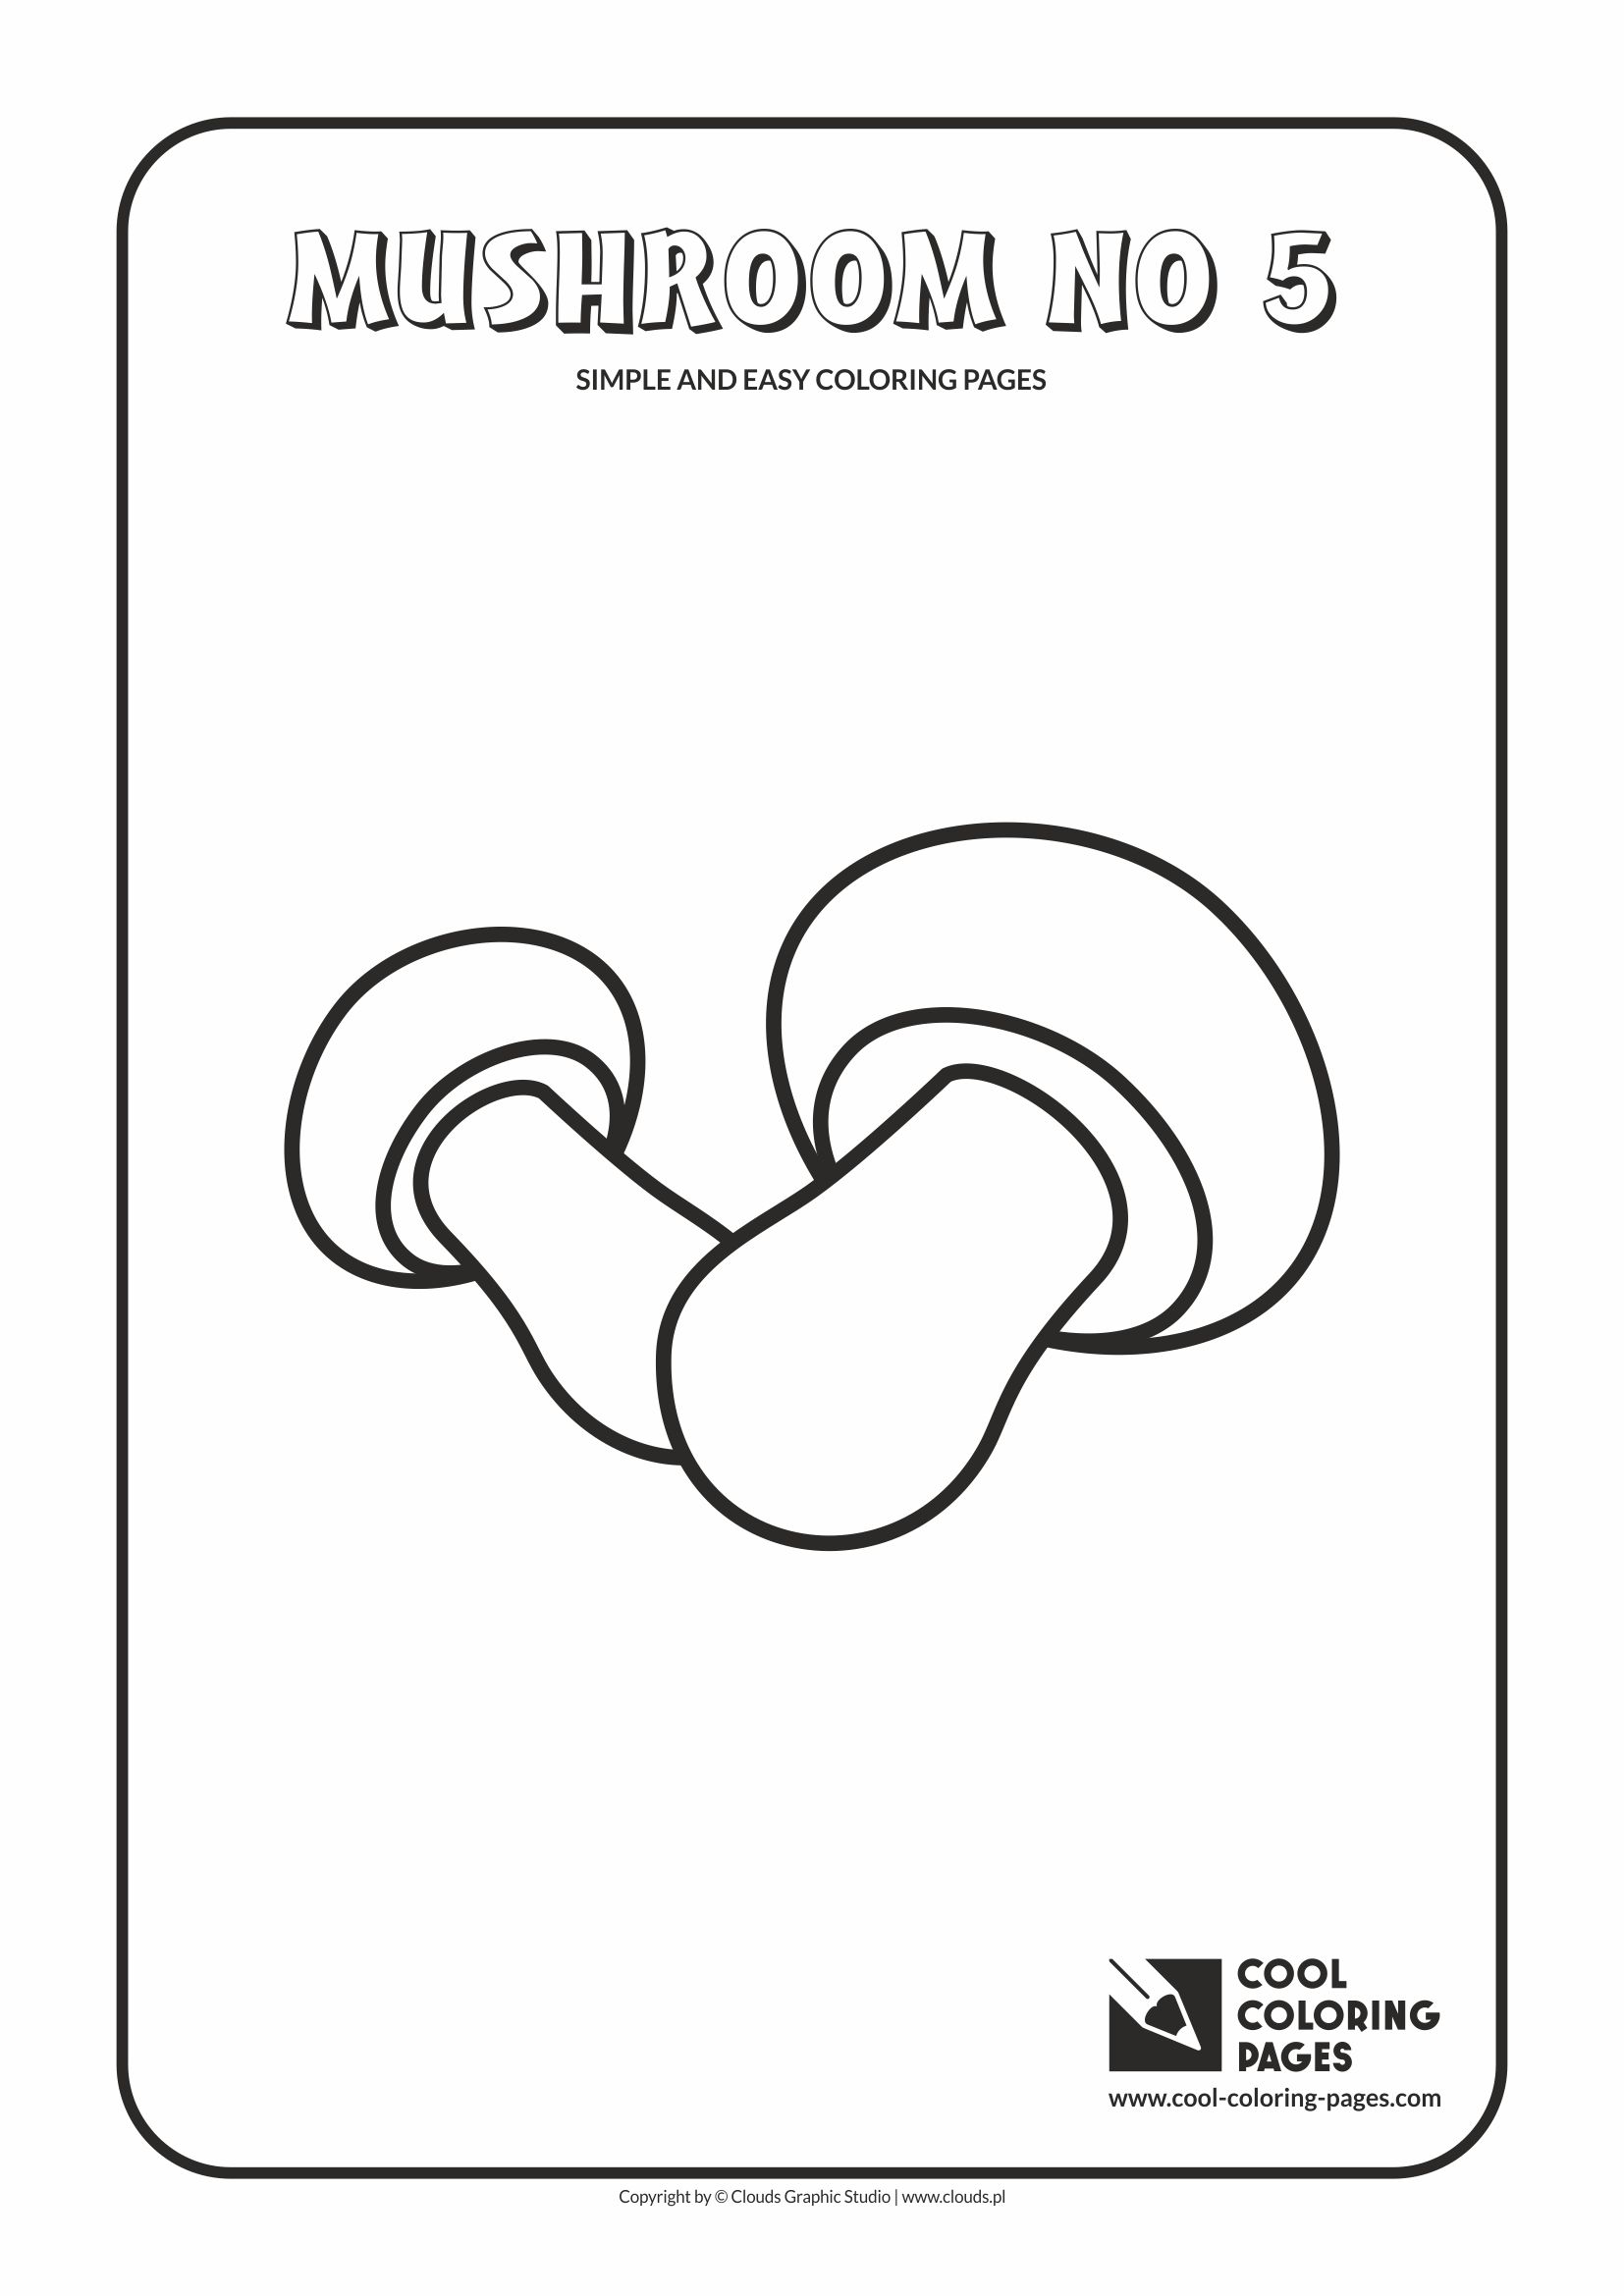 Simple and easy coloring pages for toddlers - Mushroom no 5